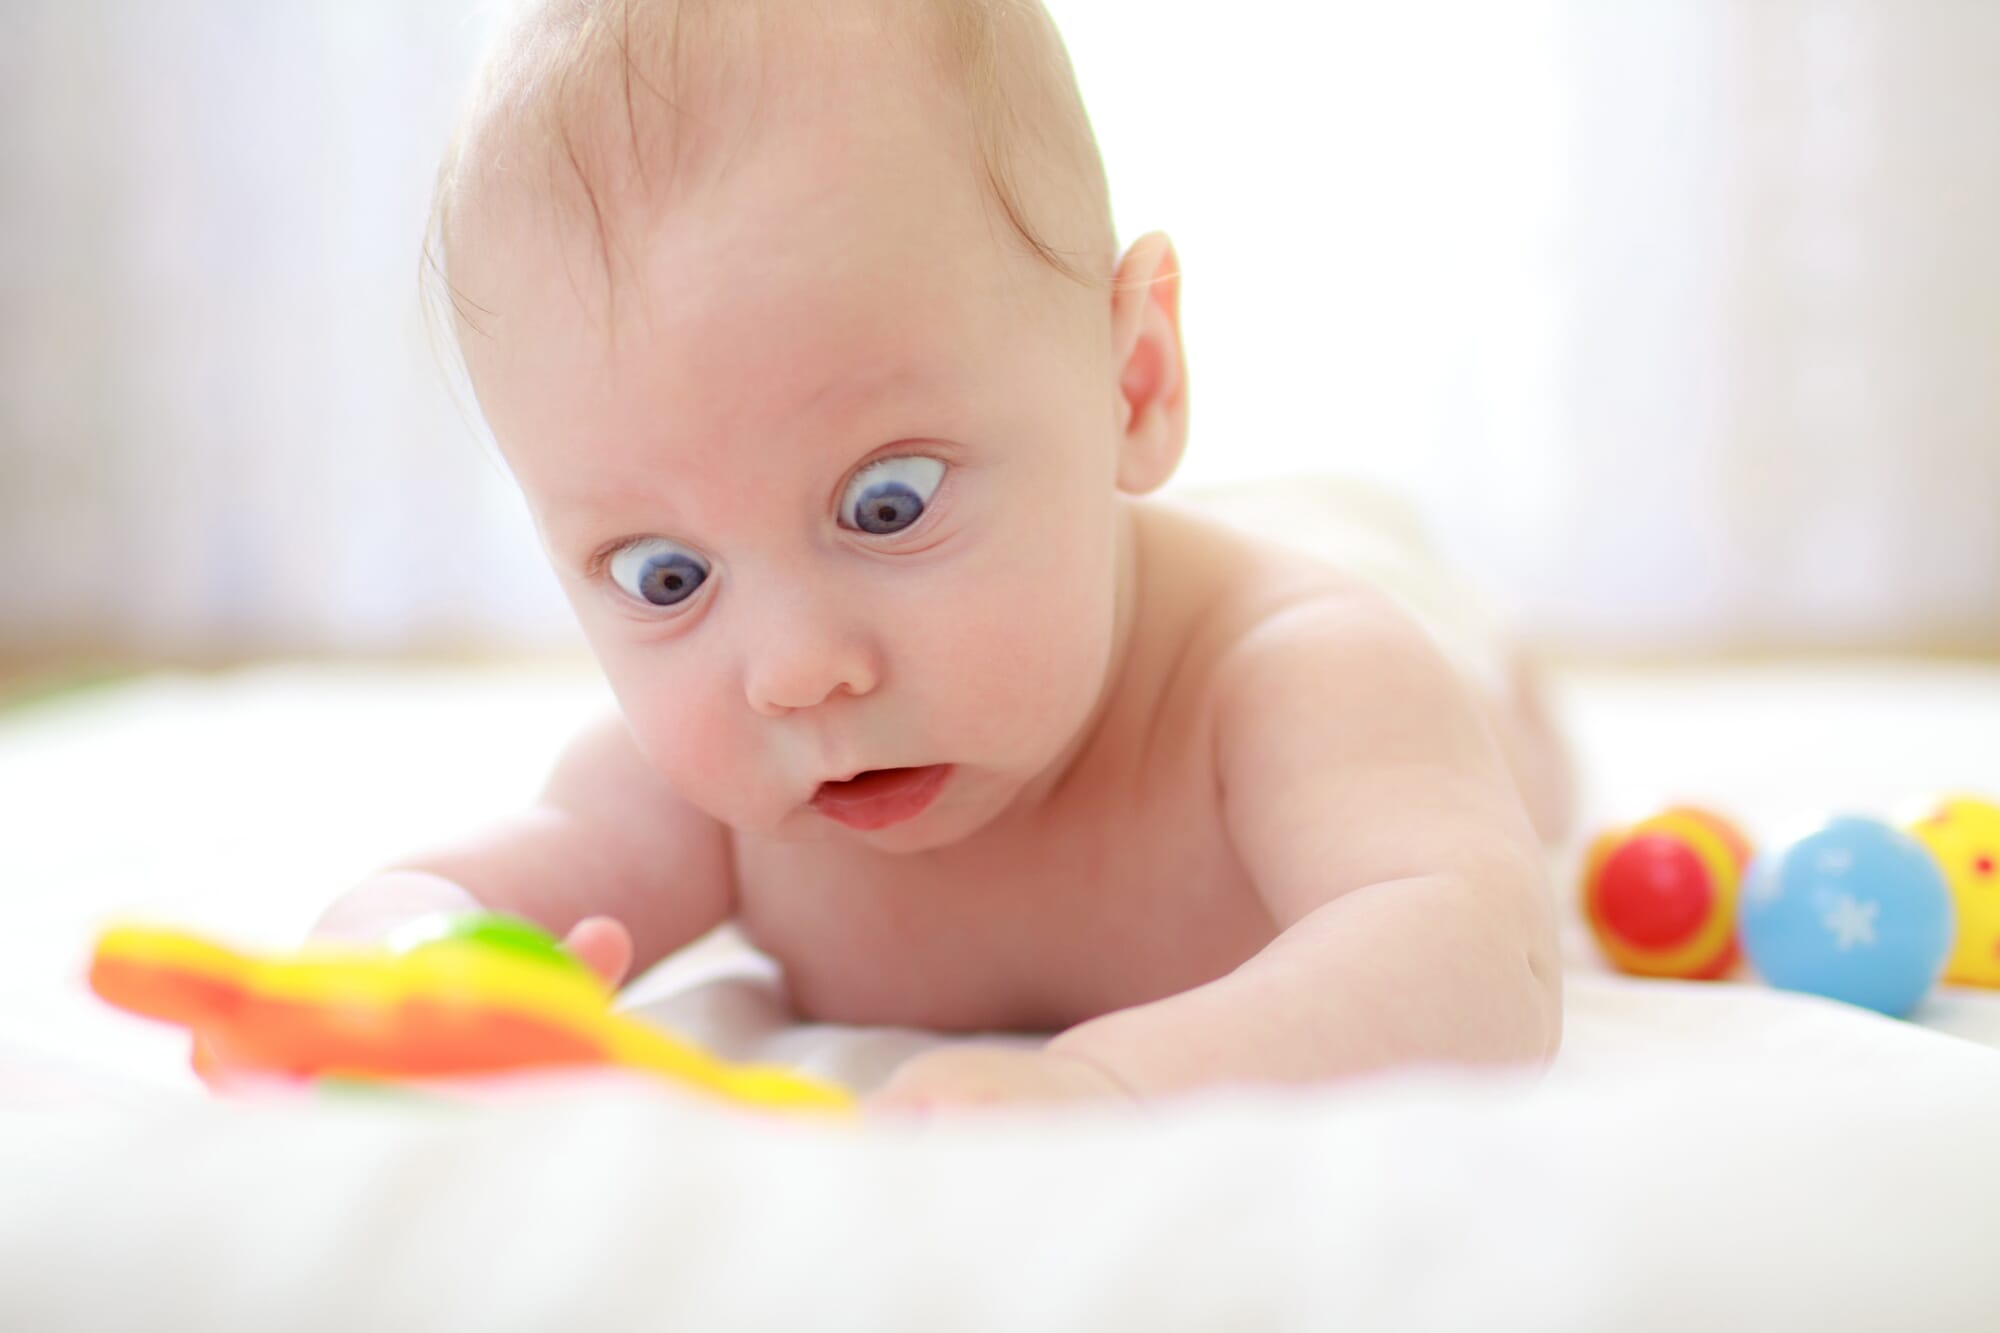 really funny photos of babies